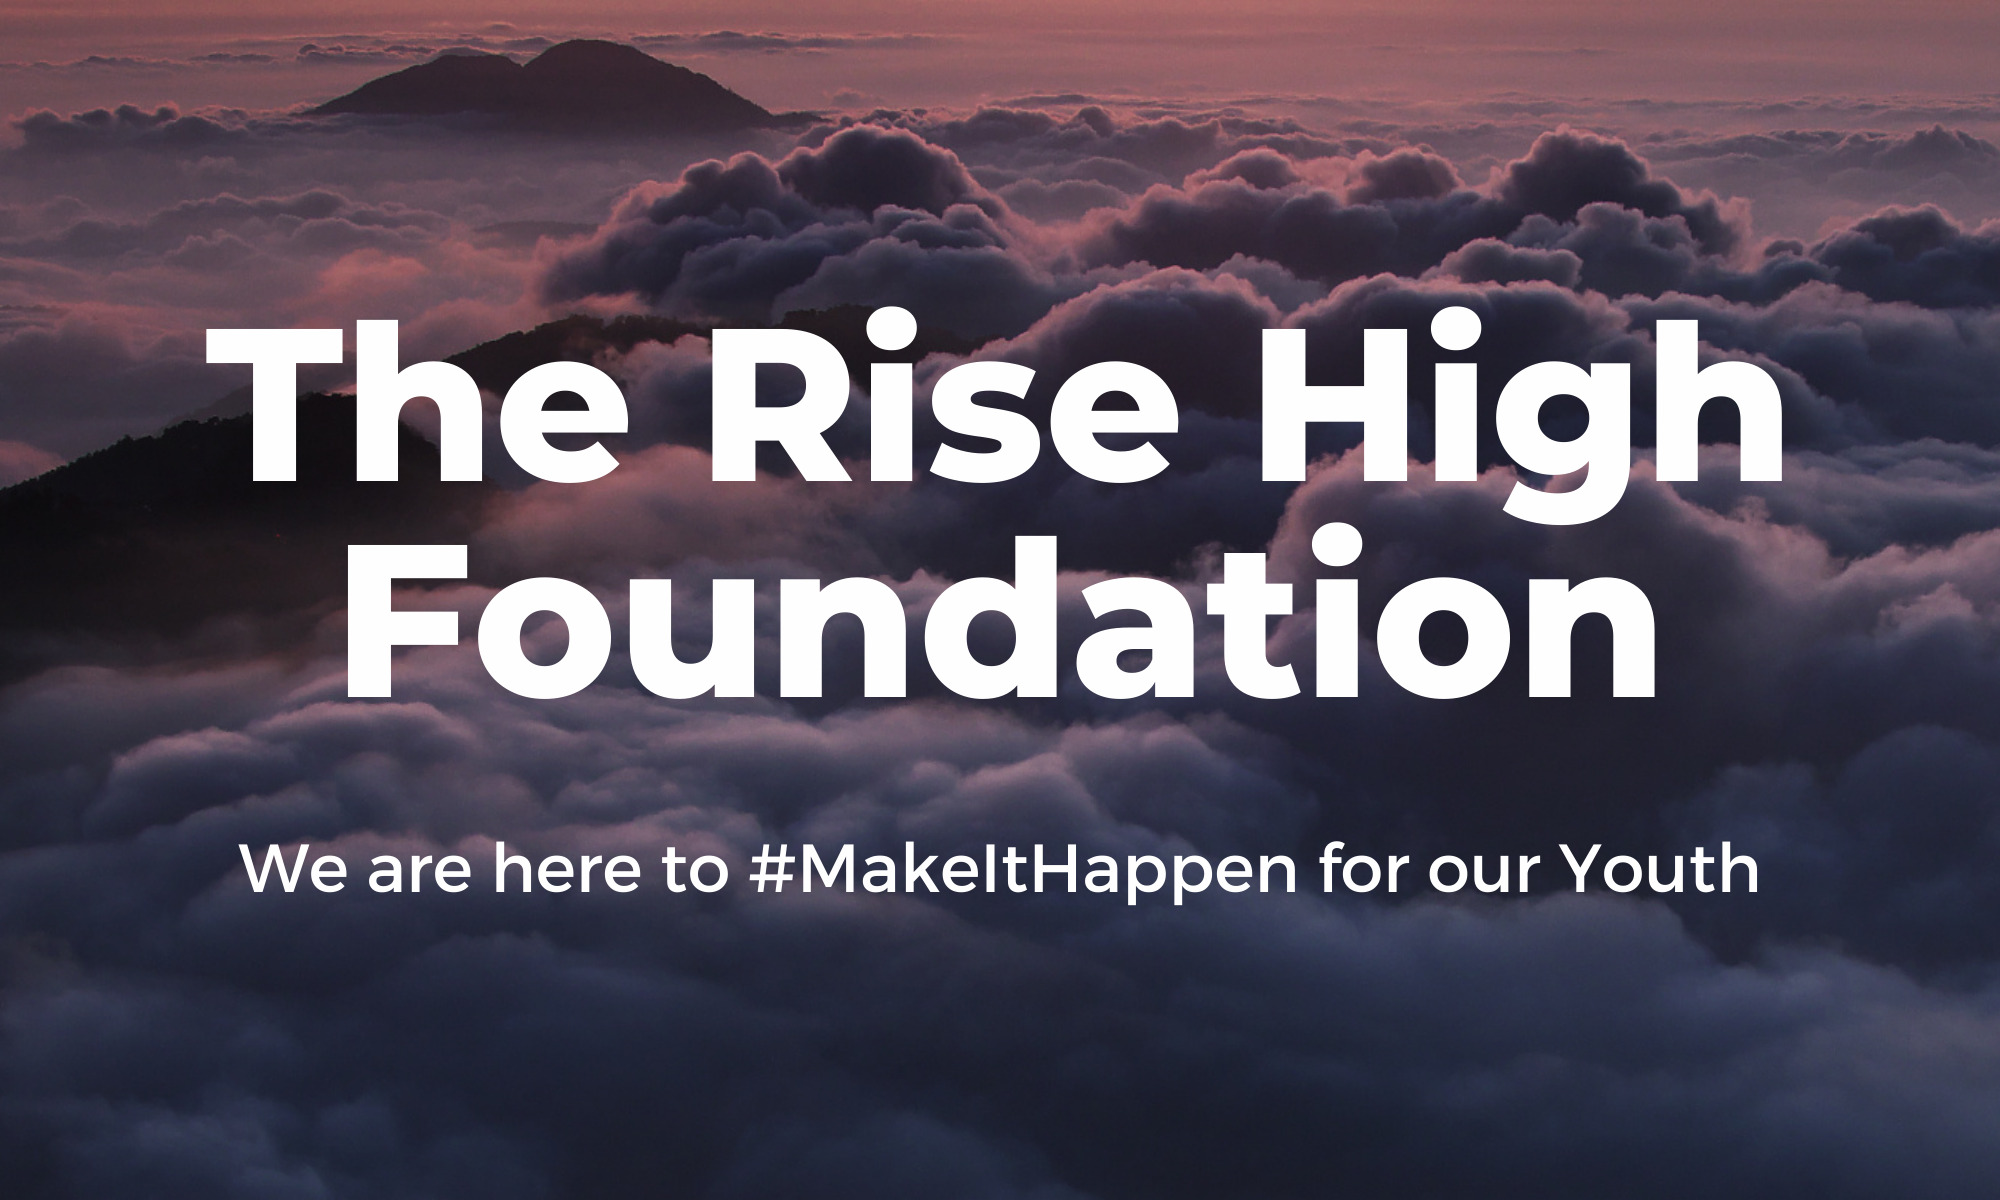 The Rise High Foundation